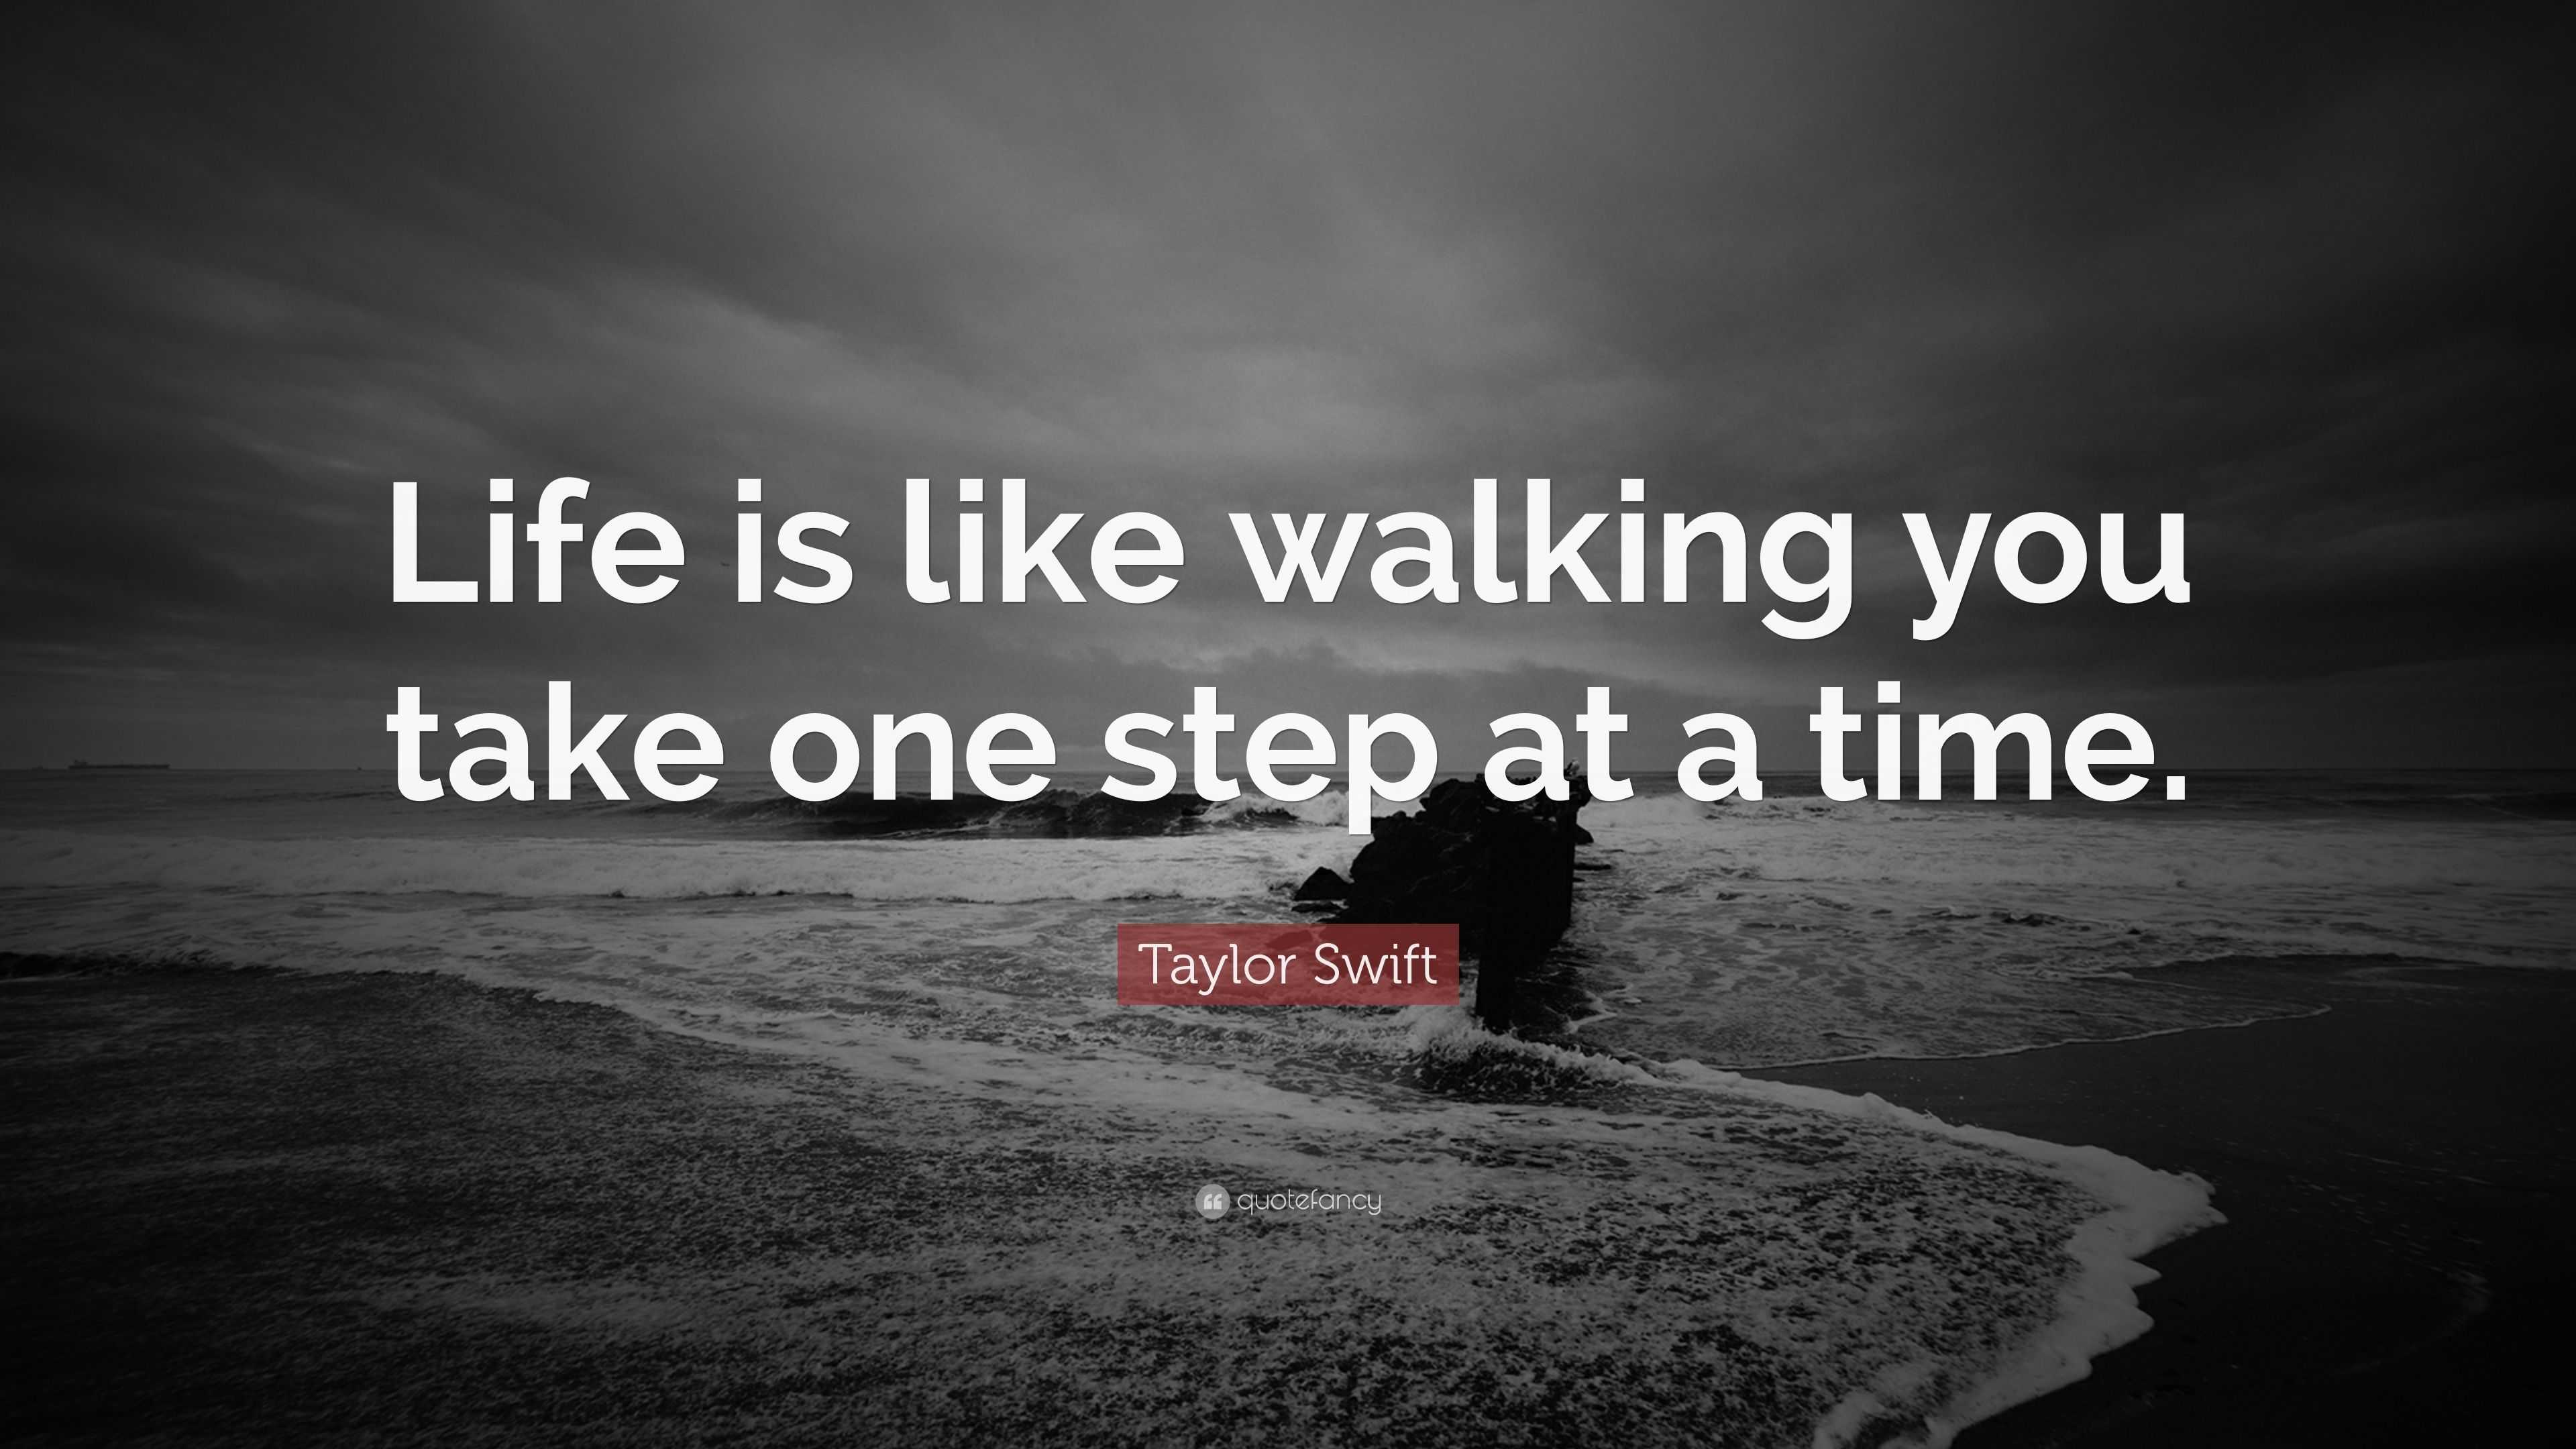 Life is like walking you take one step at a time. 